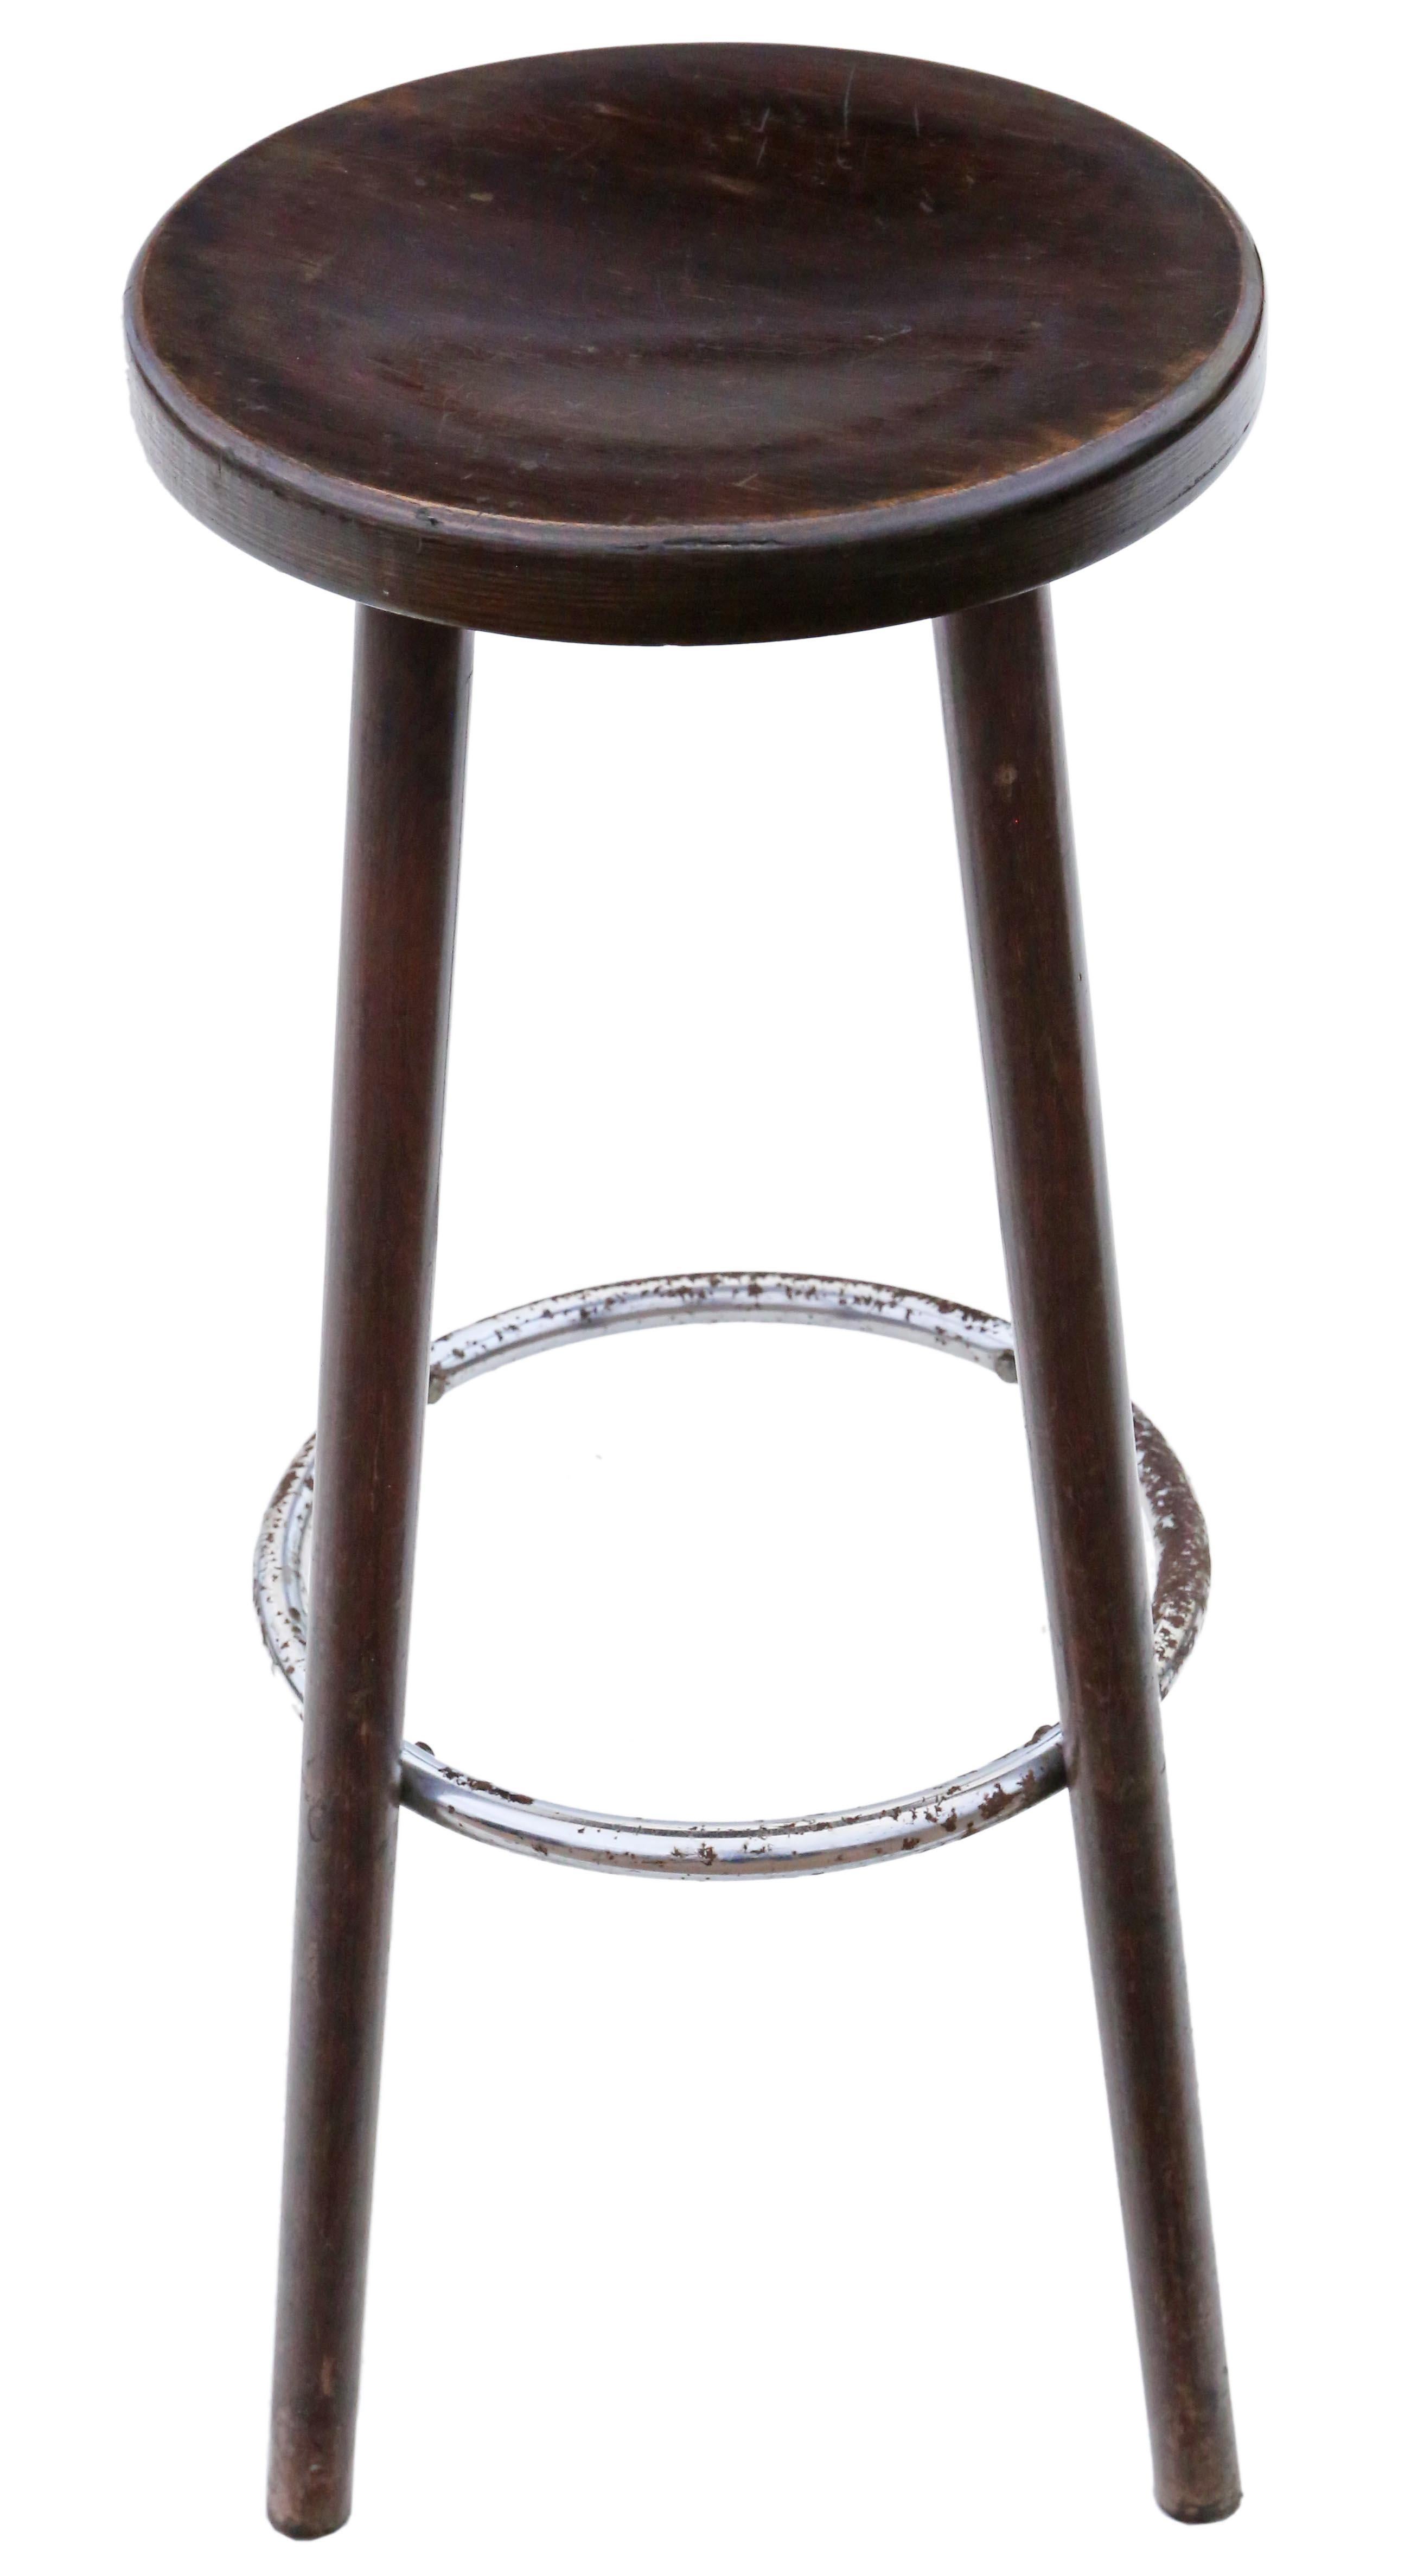 Antique quality set of 8 French bistro bar stools, circa 1960.

Solid and strong with no loose joints or woodworm.

Overall maximum dimensions: 35cm diameter seat 48cm diameter feet x 80cm high.

Very good antique condition with historic